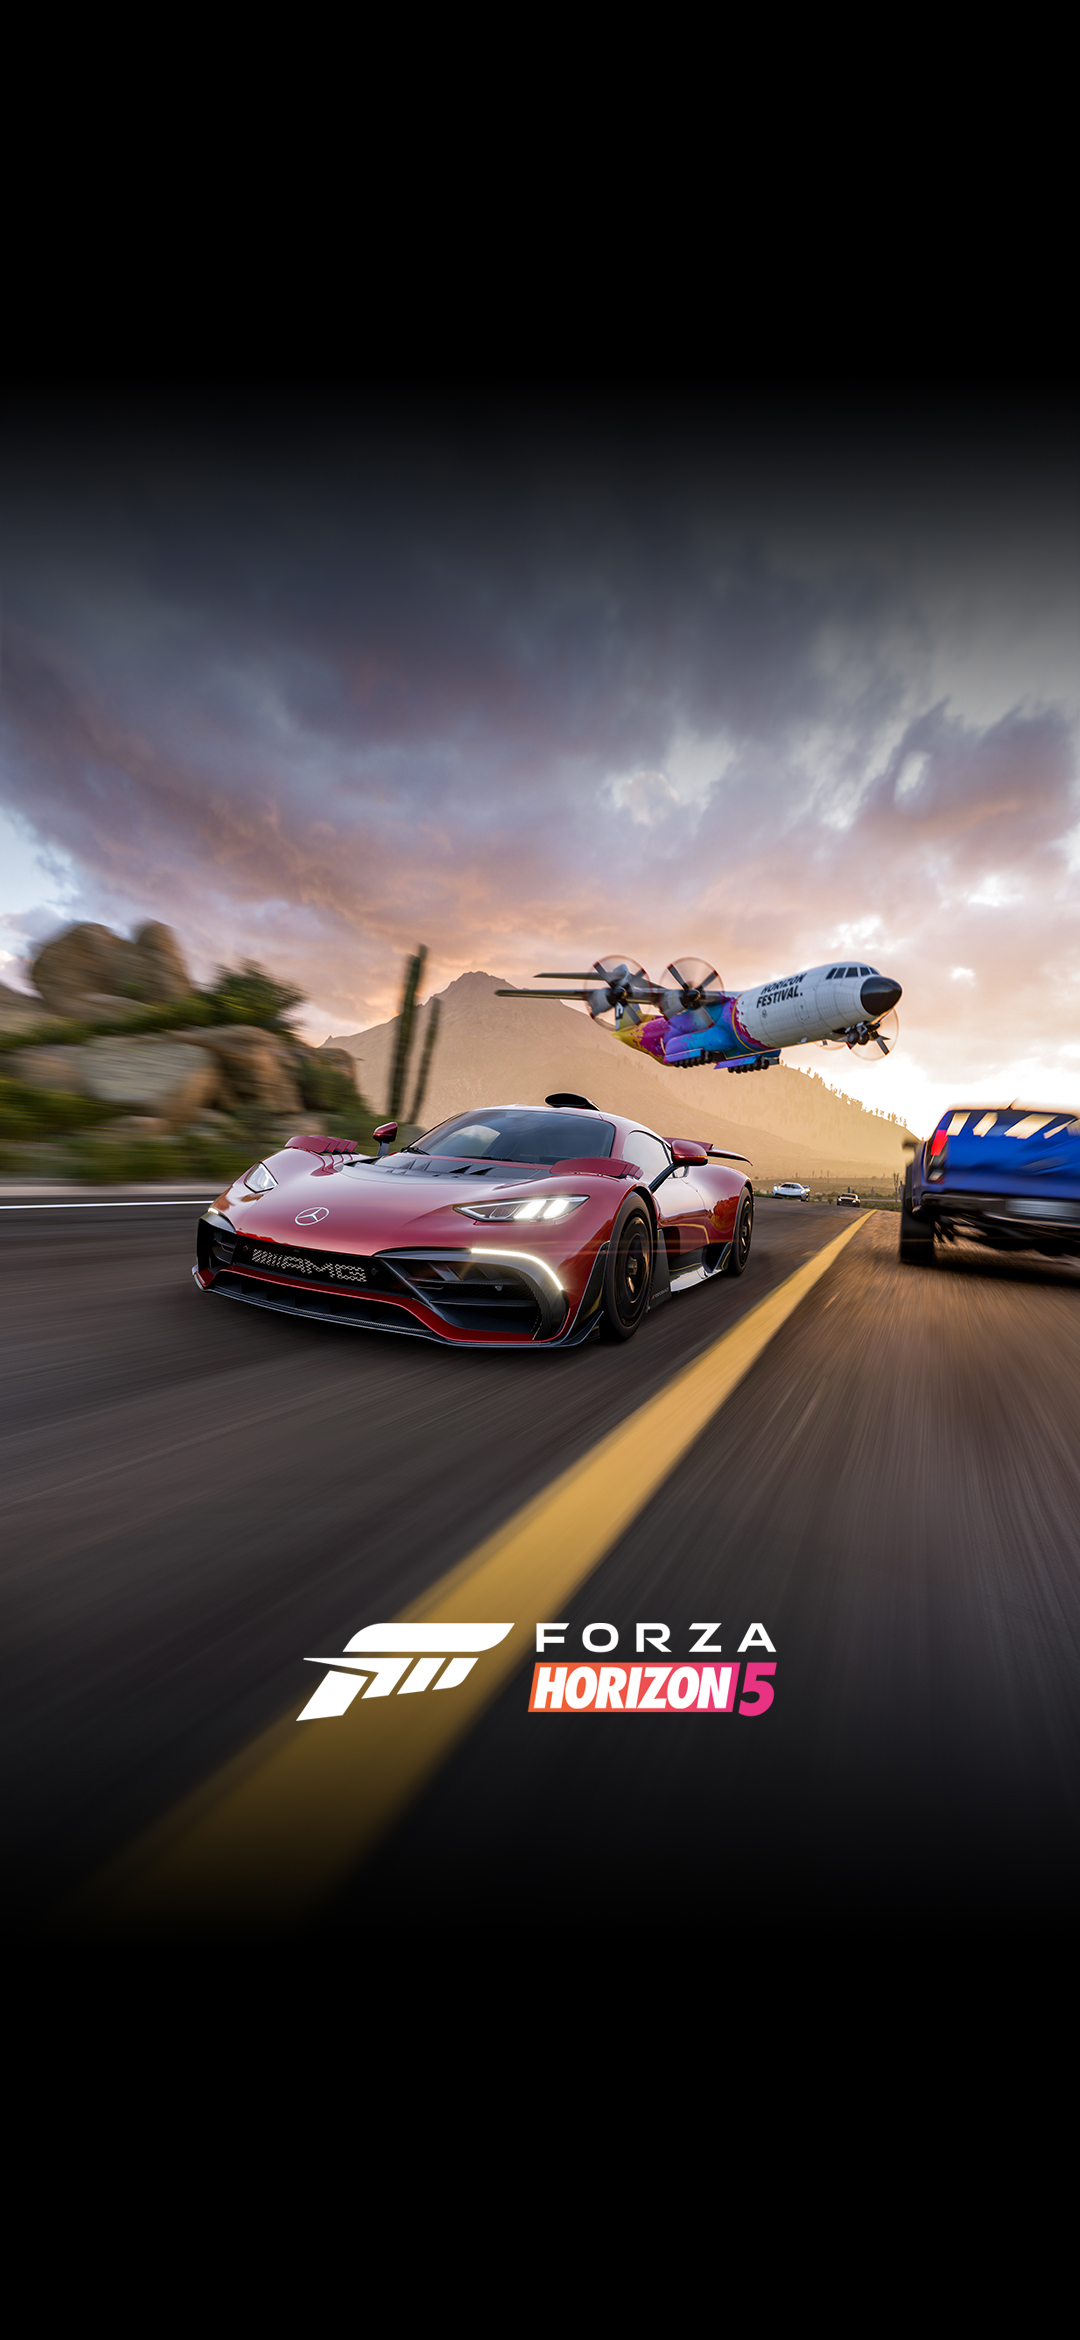 Forza horizon on wallpaper wednesday means you can take a break from playing forzahorizon to look at your phone and think about forzahorizon httpstcouizcnvnv